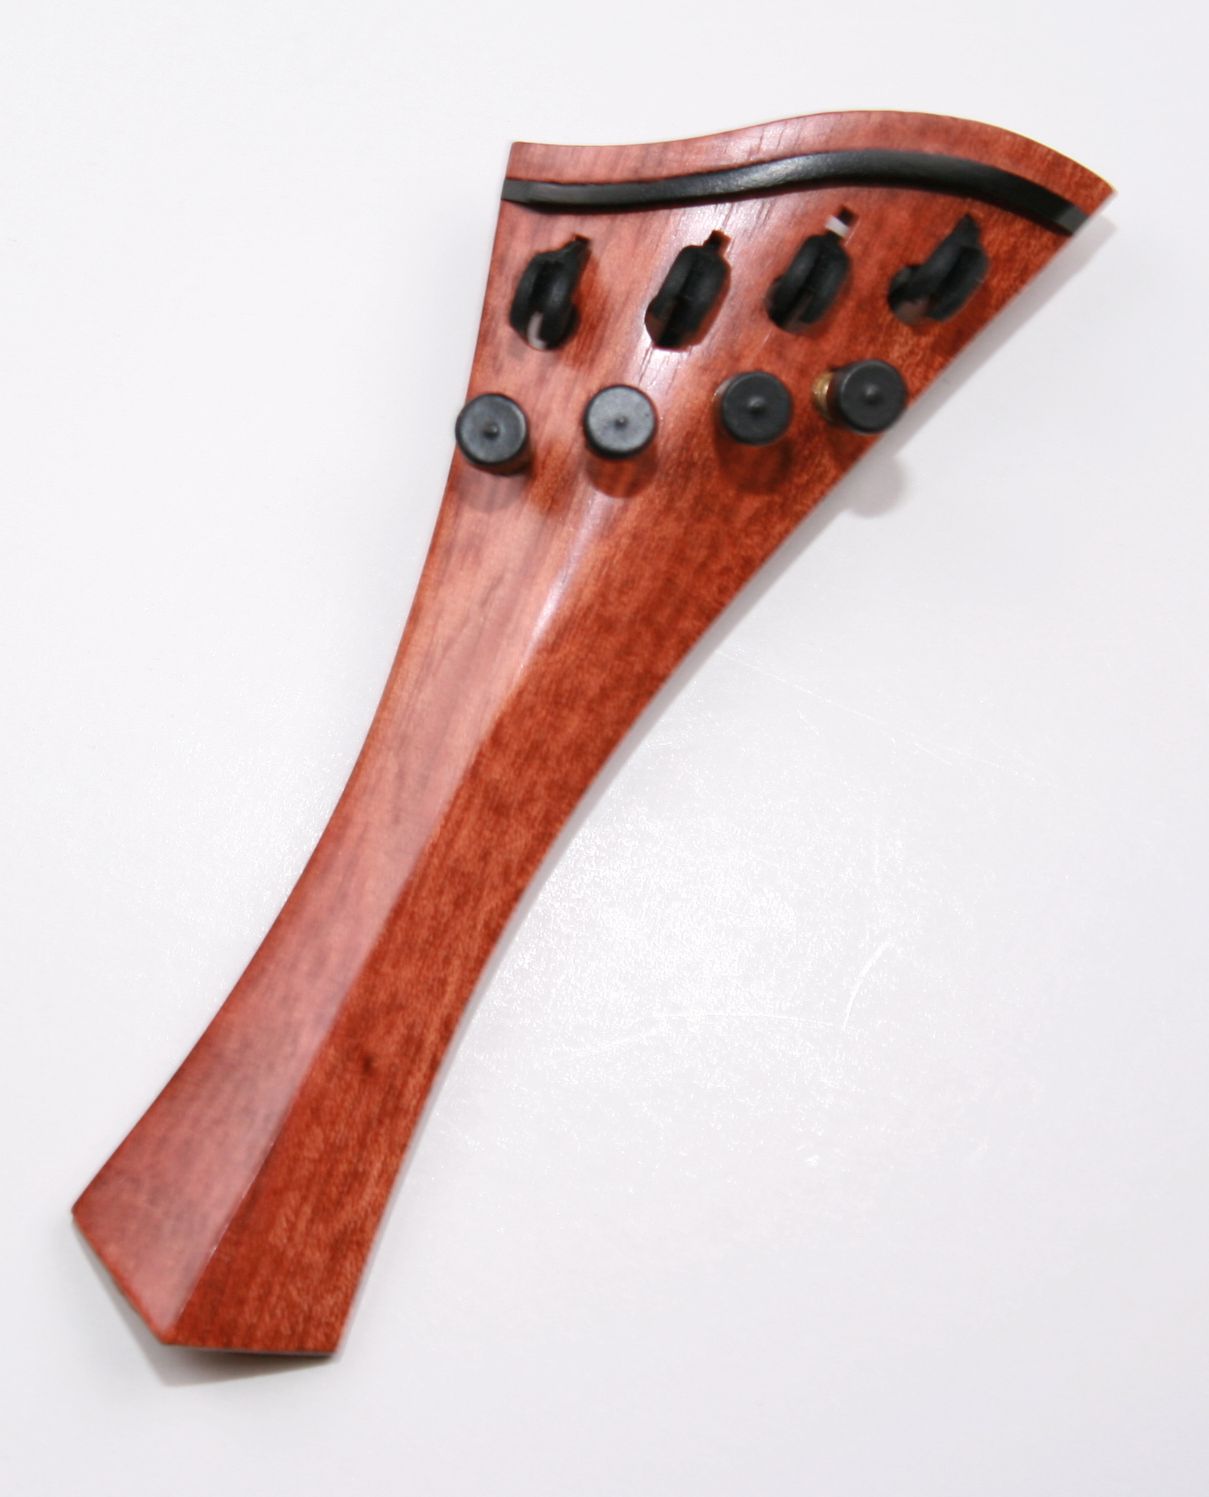 Violin tailpiece-"Schmidt Harp style"-"Mexican Pernambuco"-4 tuners